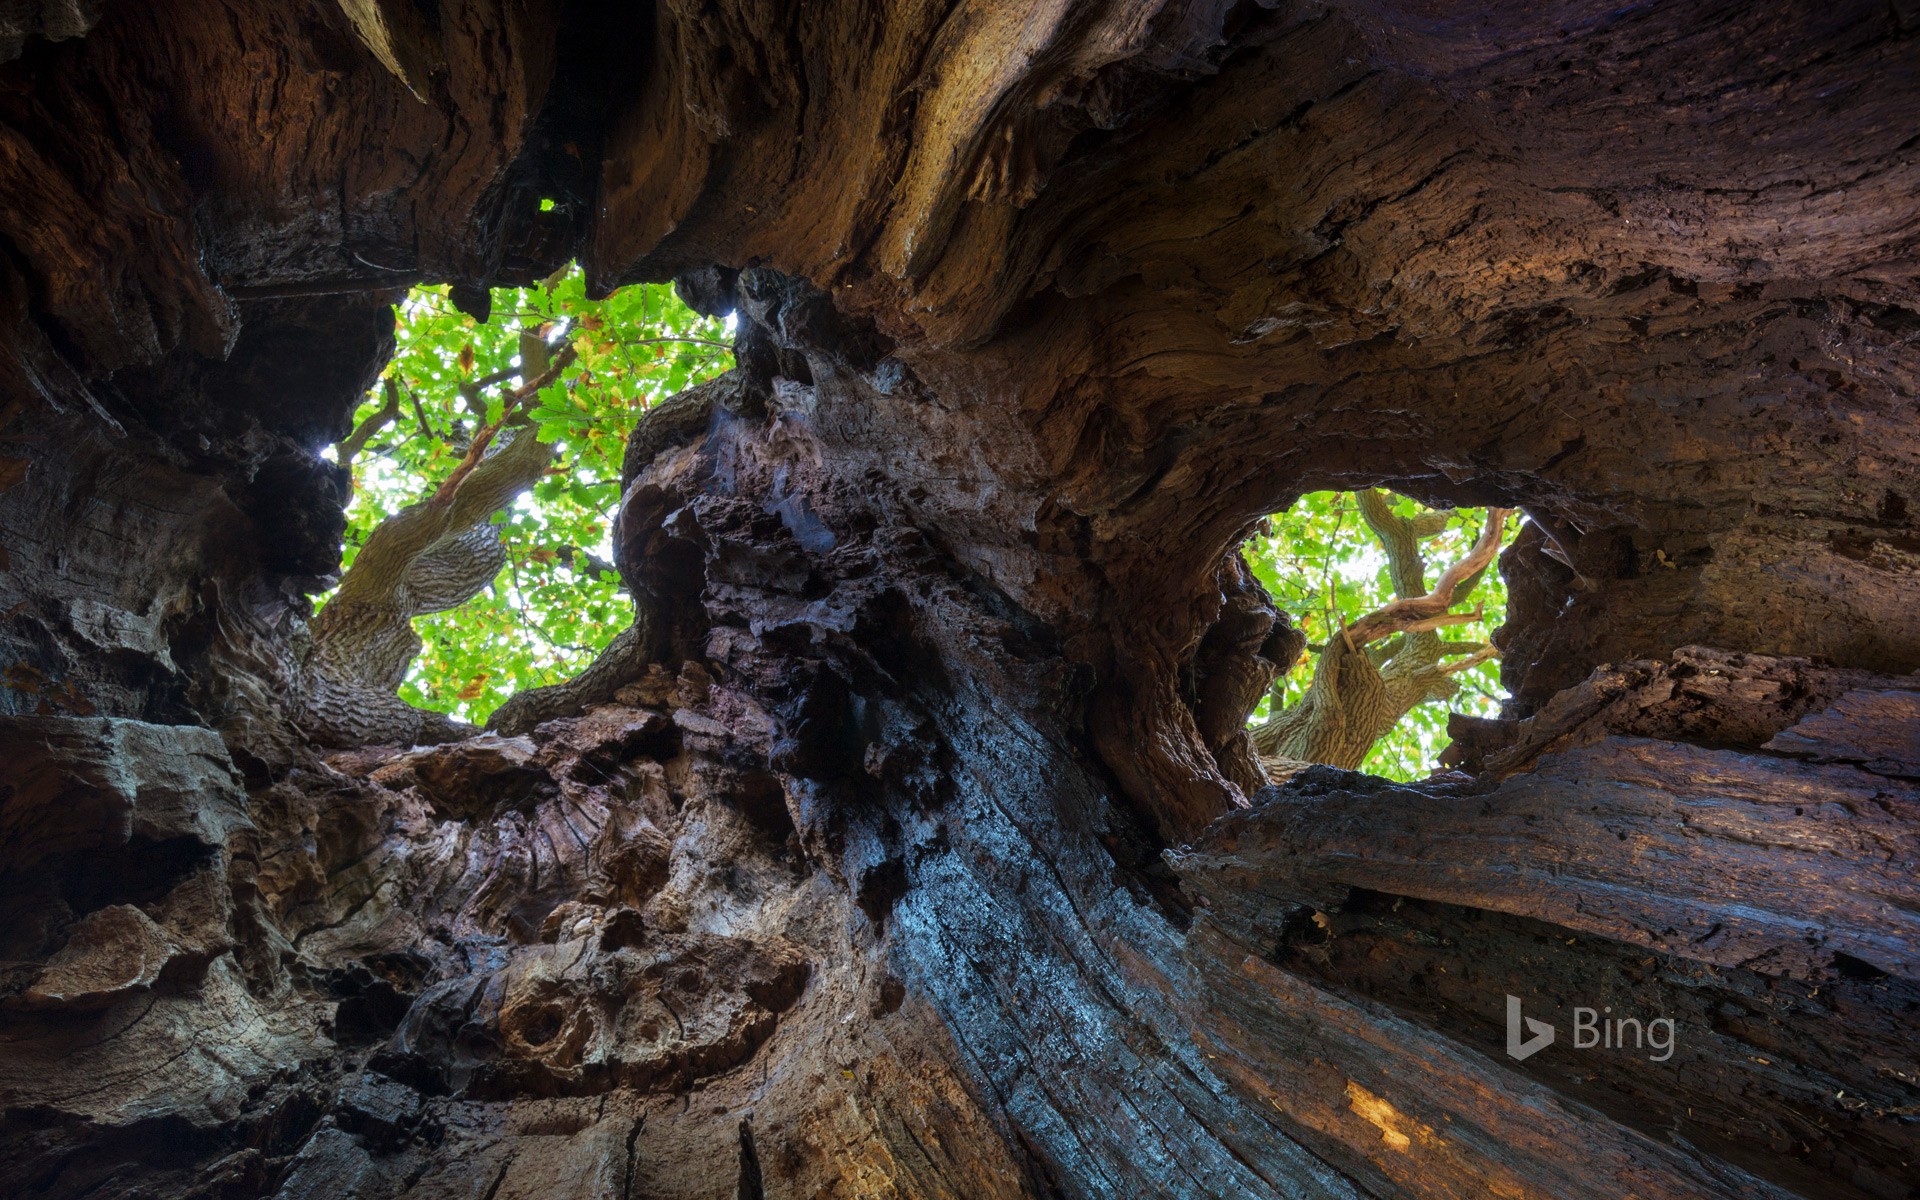 View up to the canopy through holes in an old English oak, Sherwood Forest, Nottinghamshire